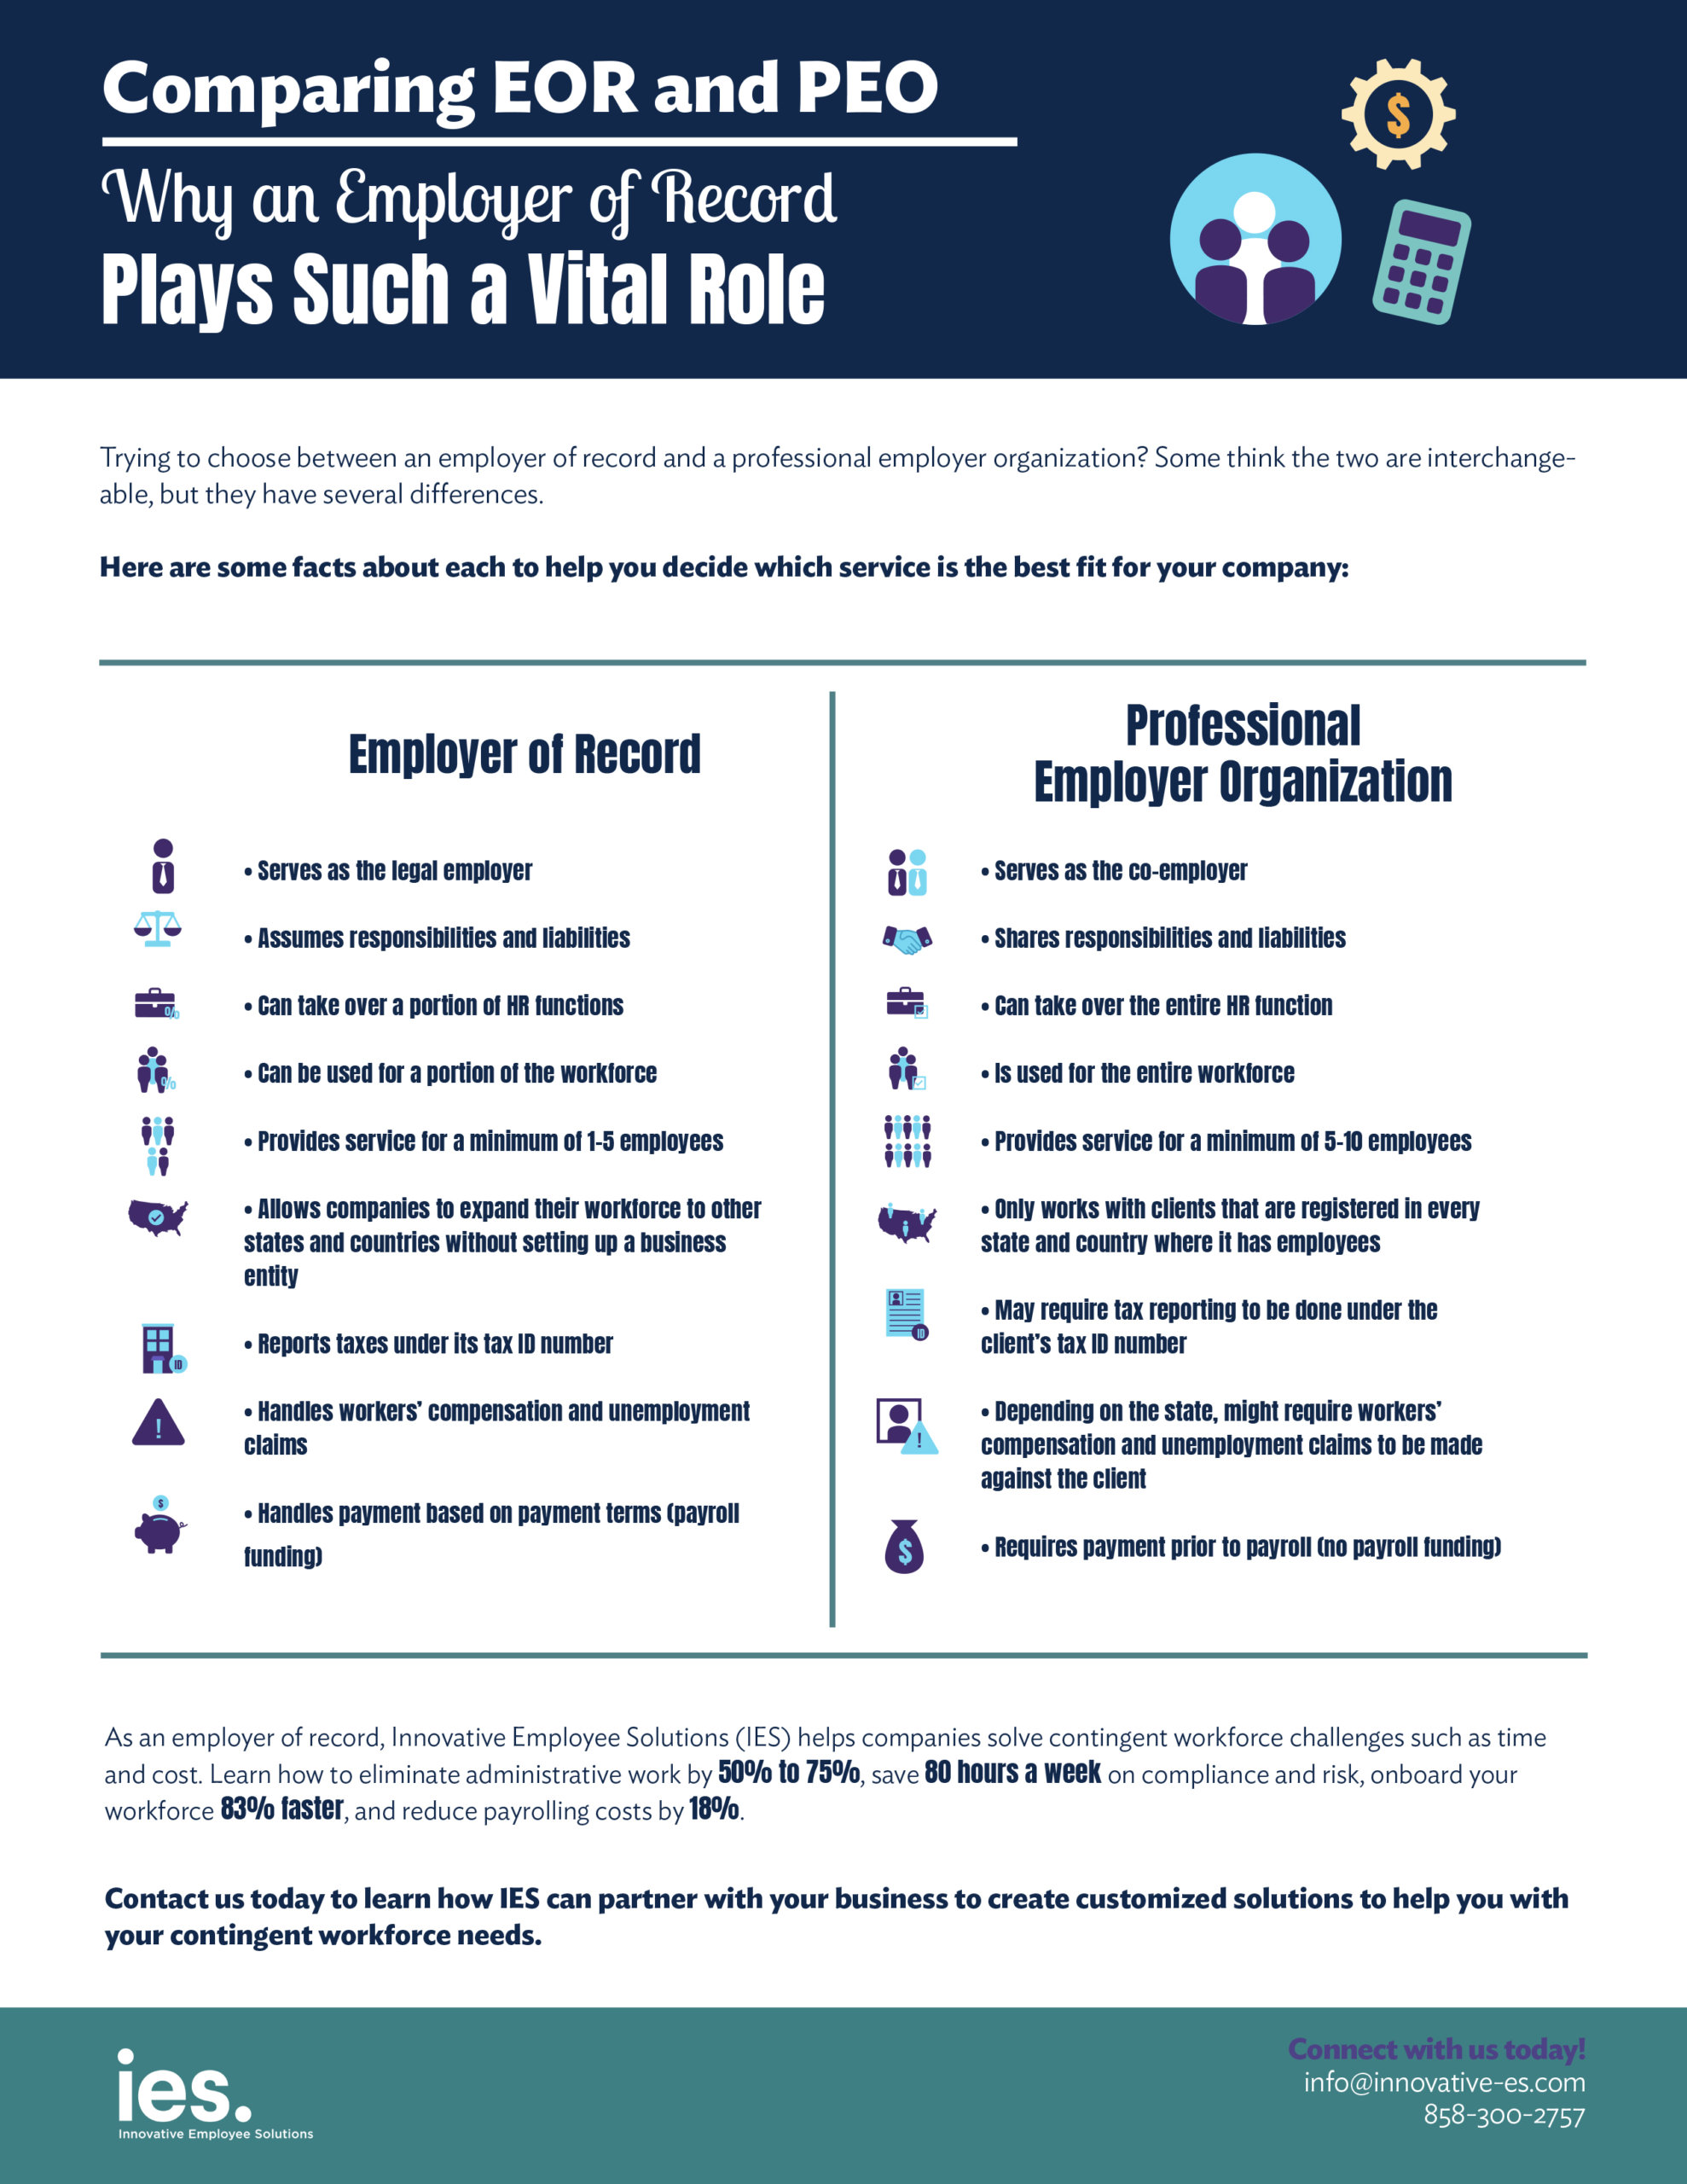 IES Infographic - Why an Employer of Record Plays Such a Vital Role EOR vs PEO